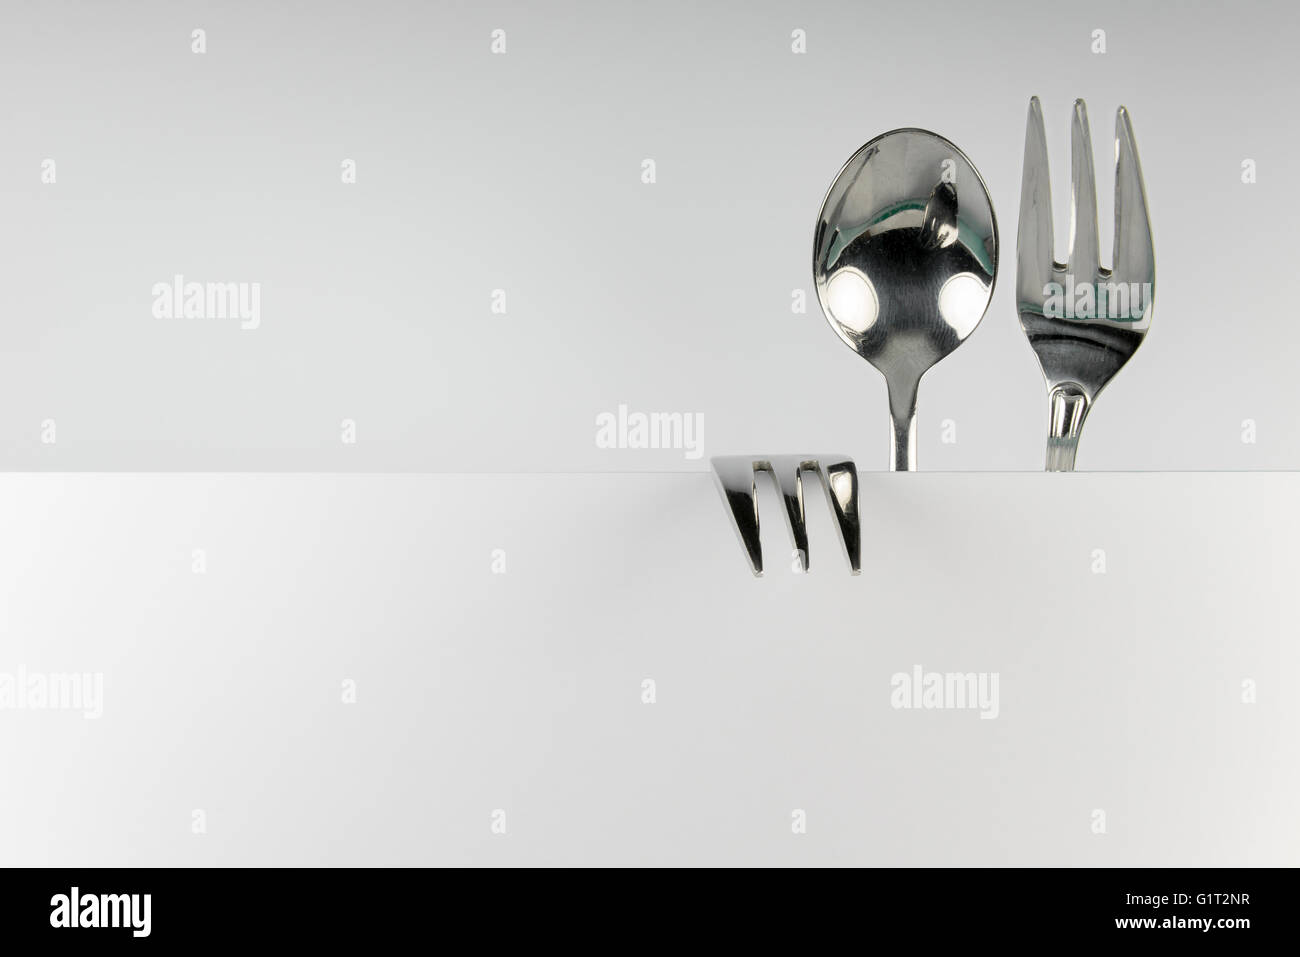 Metal spoon and two forks formed into conceptual fantasy figure Stock Photo